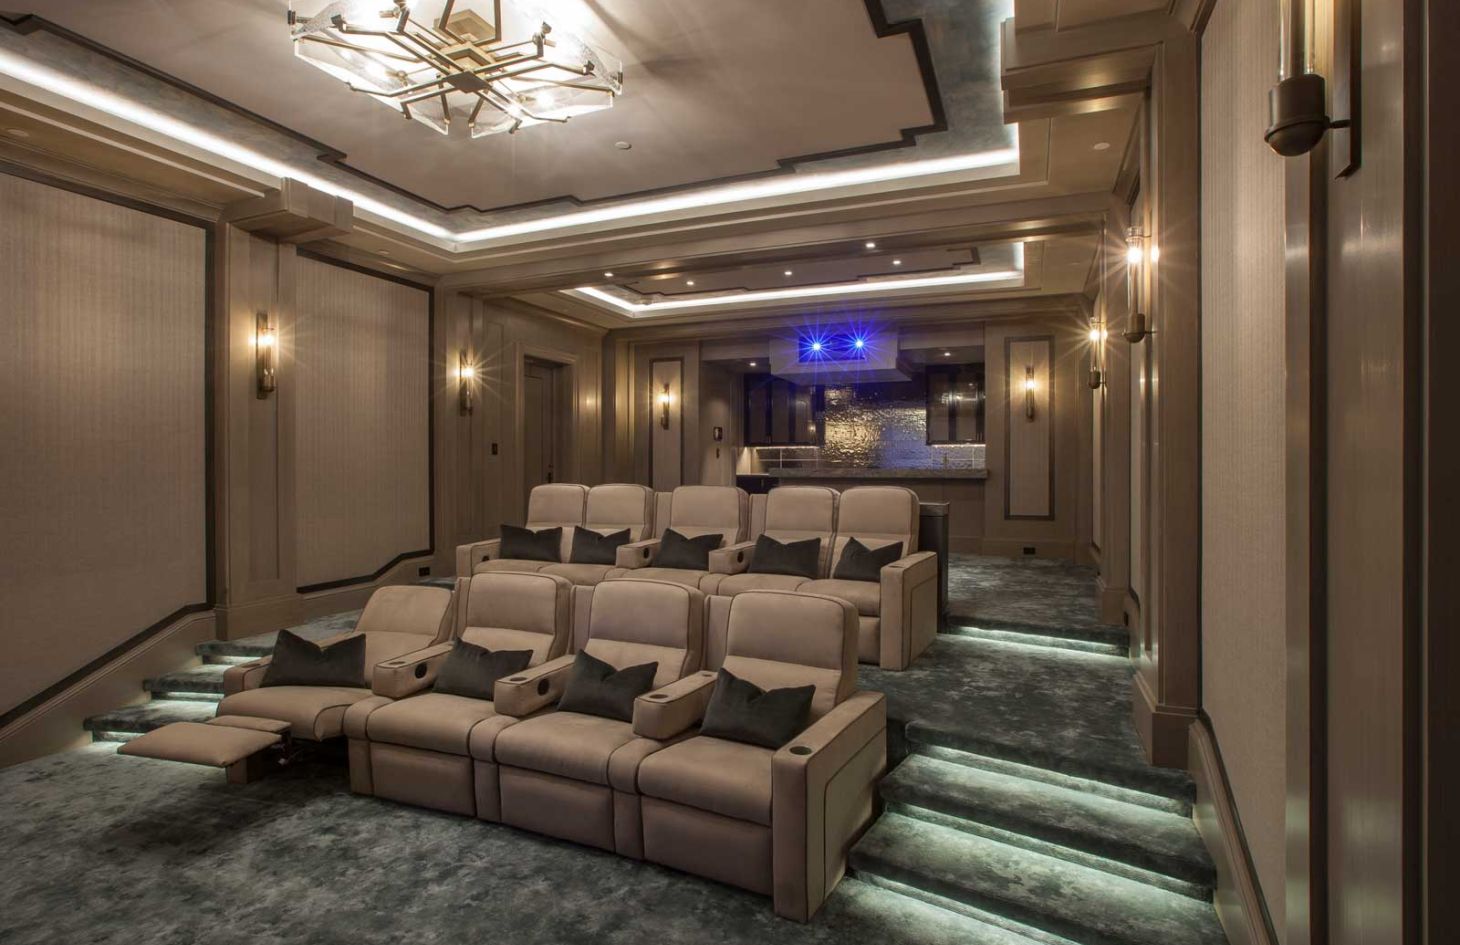 Tan Furniture, Traditional, Future Home Theater, Home Theater Installation, Seating